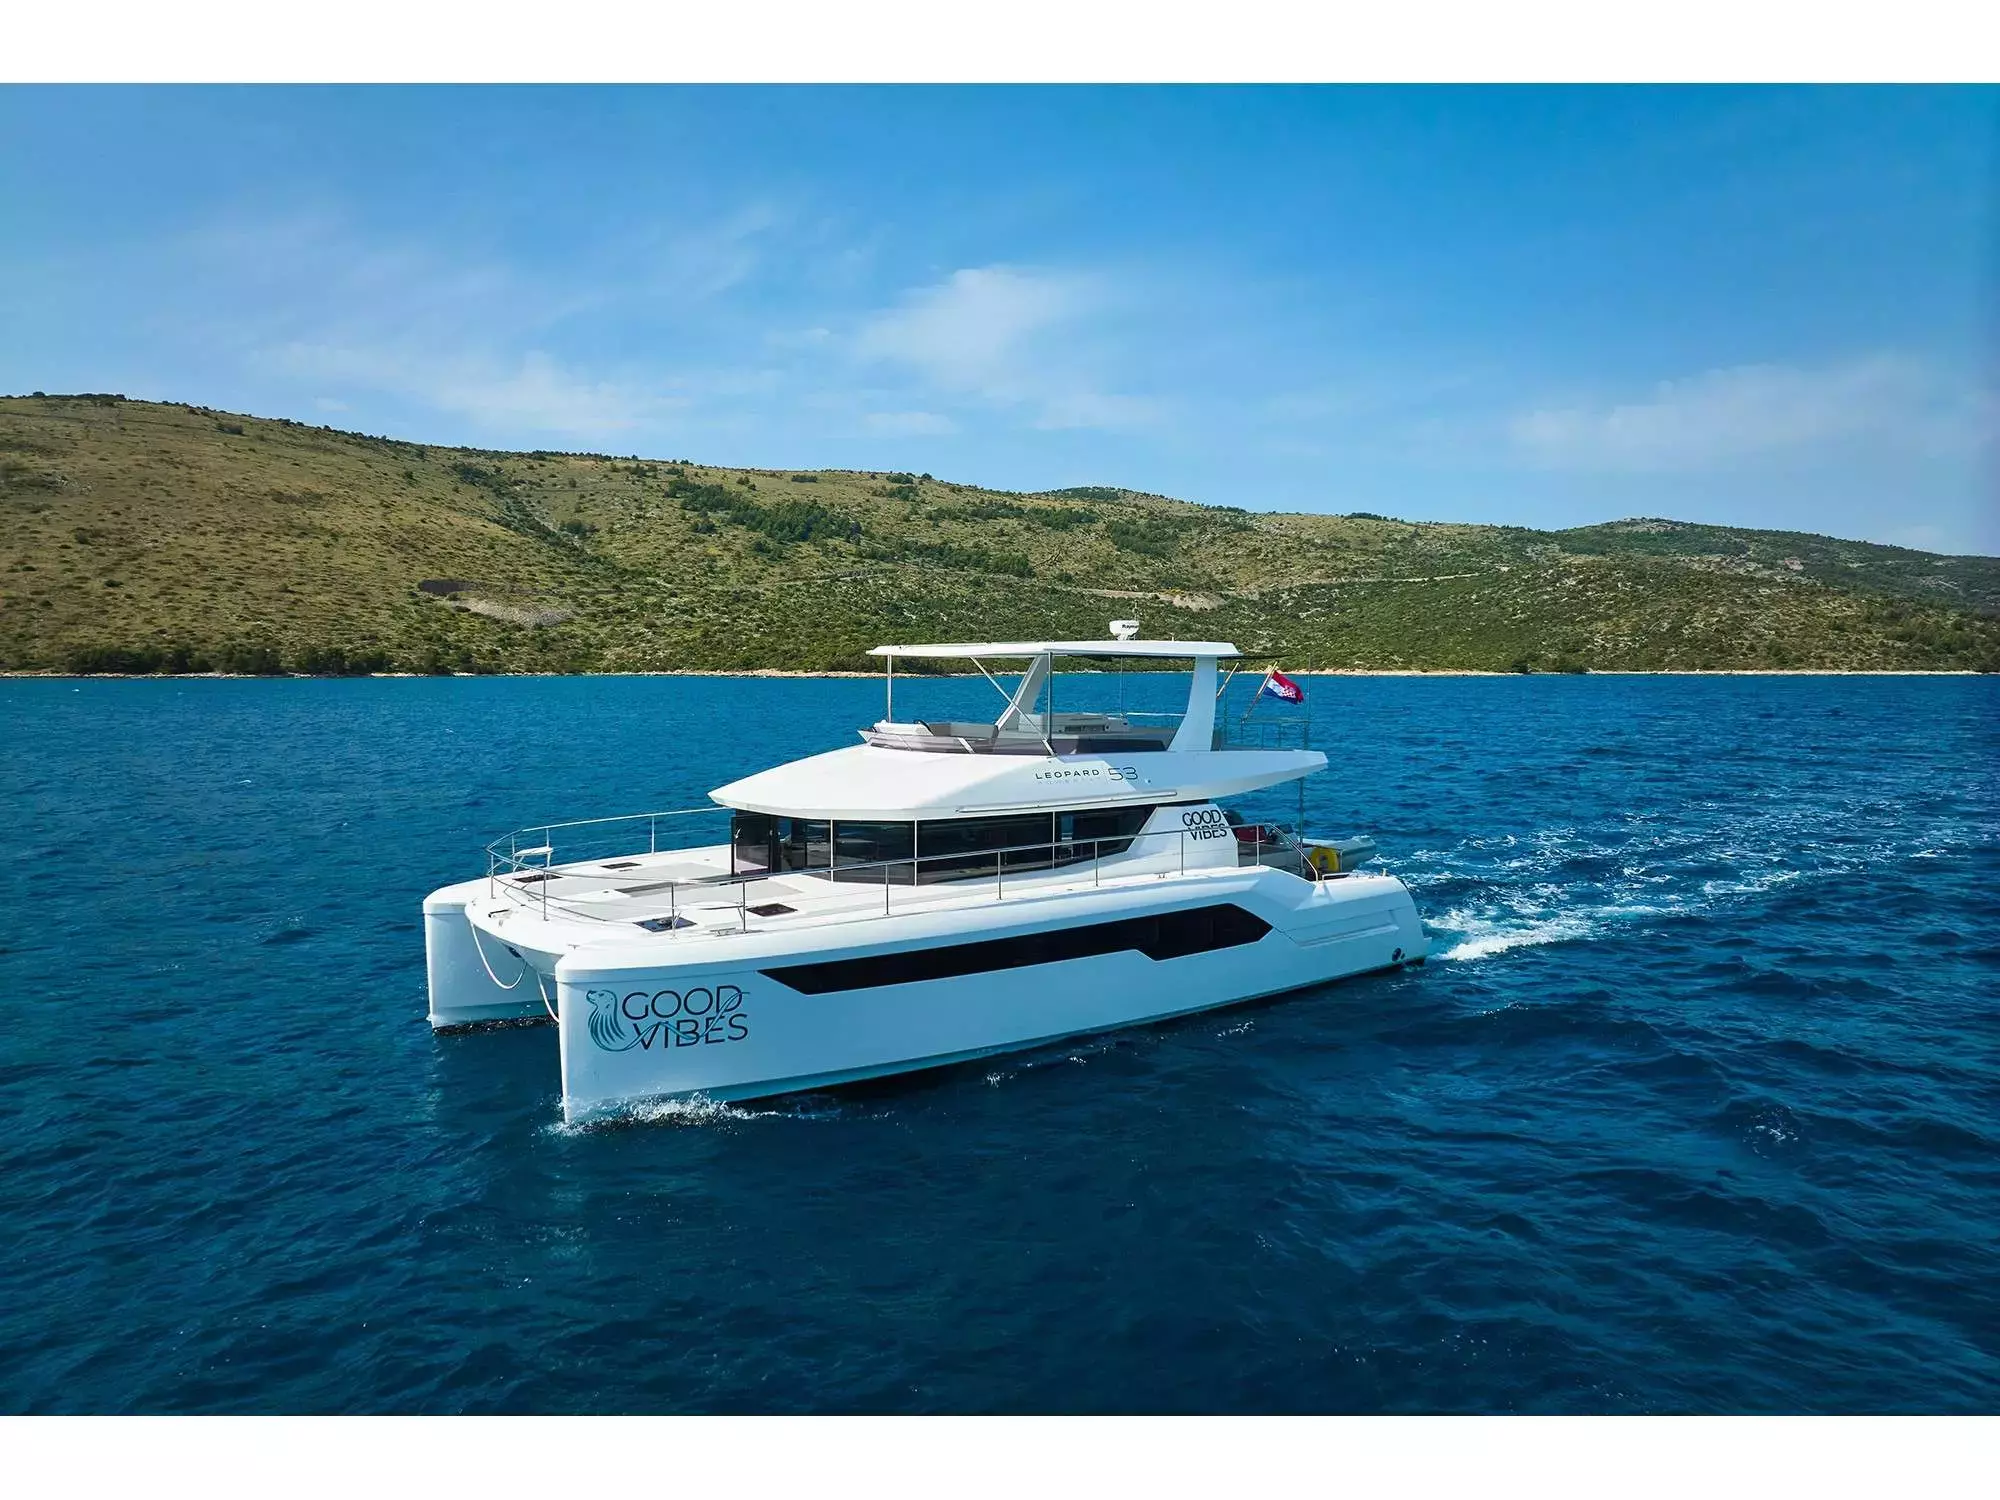 Good Vibes by Leopard Catamarans - Top rates for a Charter of a private Power Catamaran in Montenegro